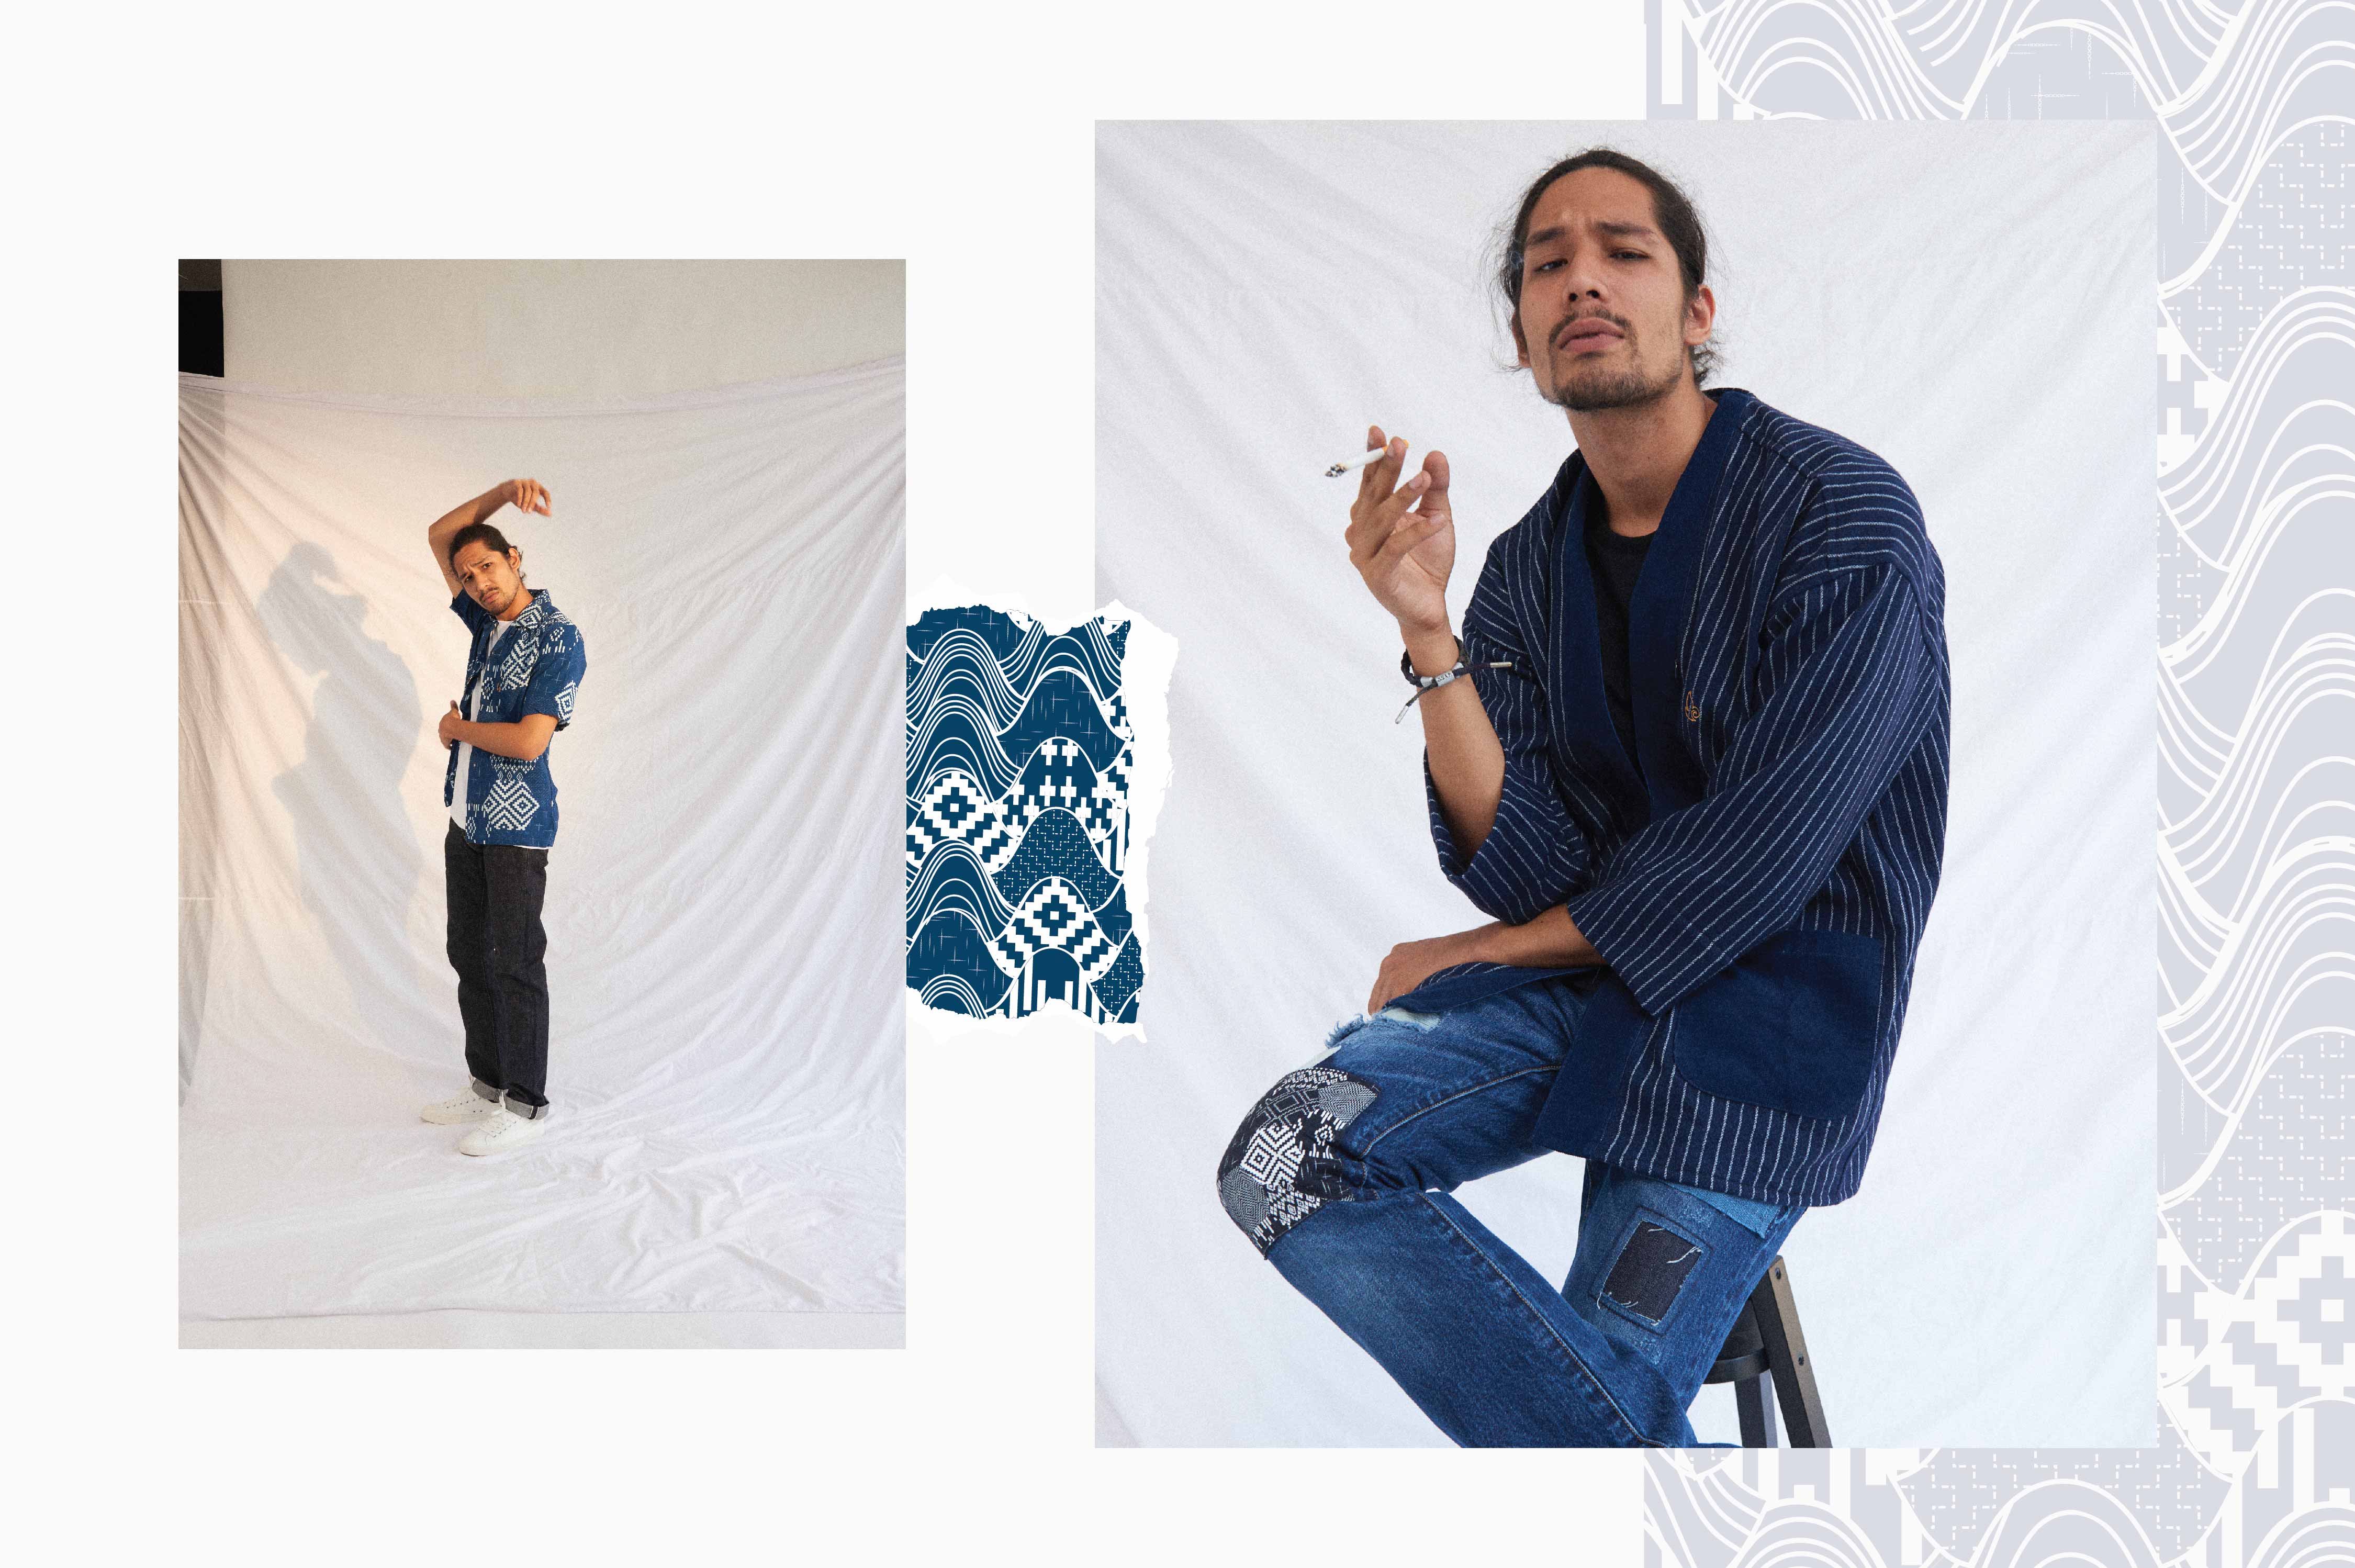 INDIGOSKIN SPRING/SUMMER 2020 “Woven in Time” Lookbook